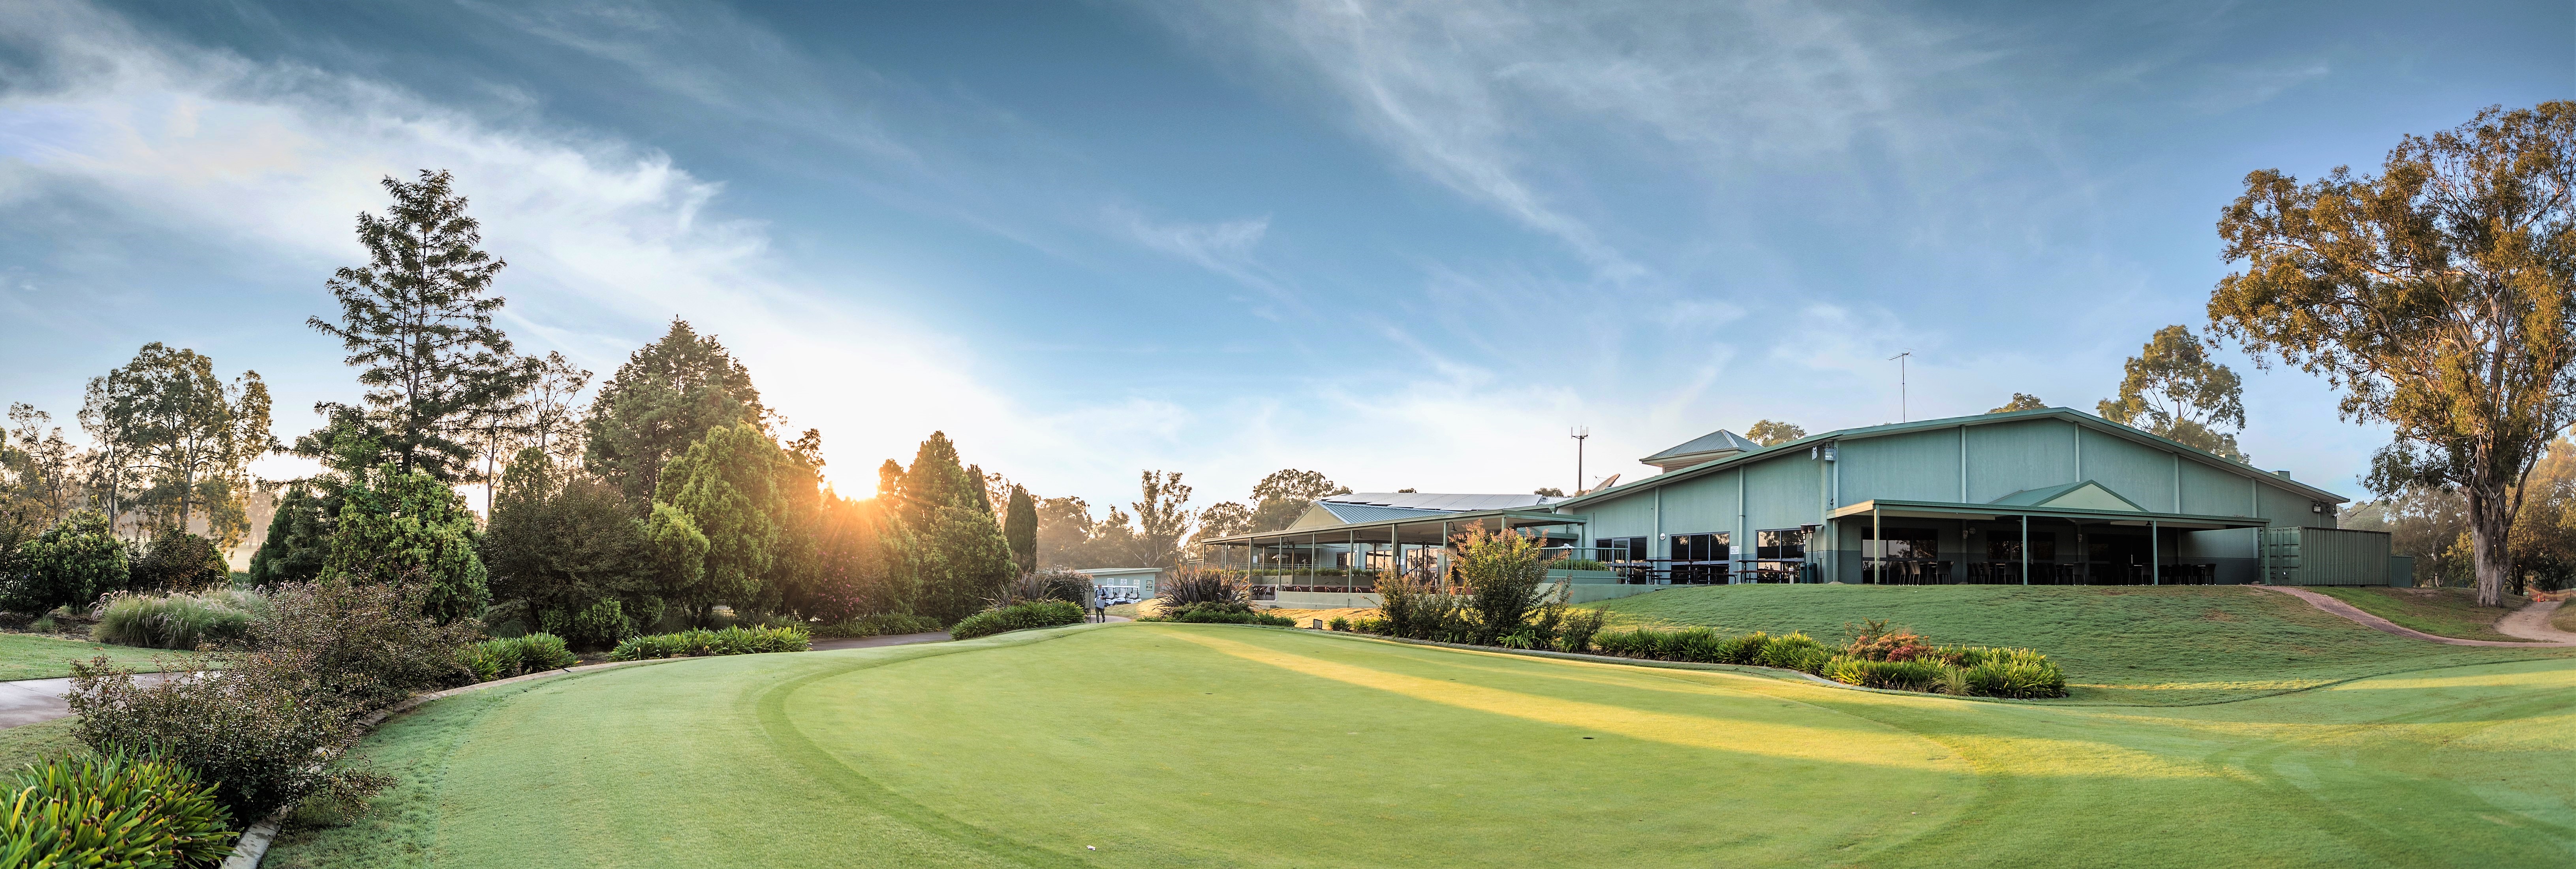 Penrith Golf Club Clubhouse